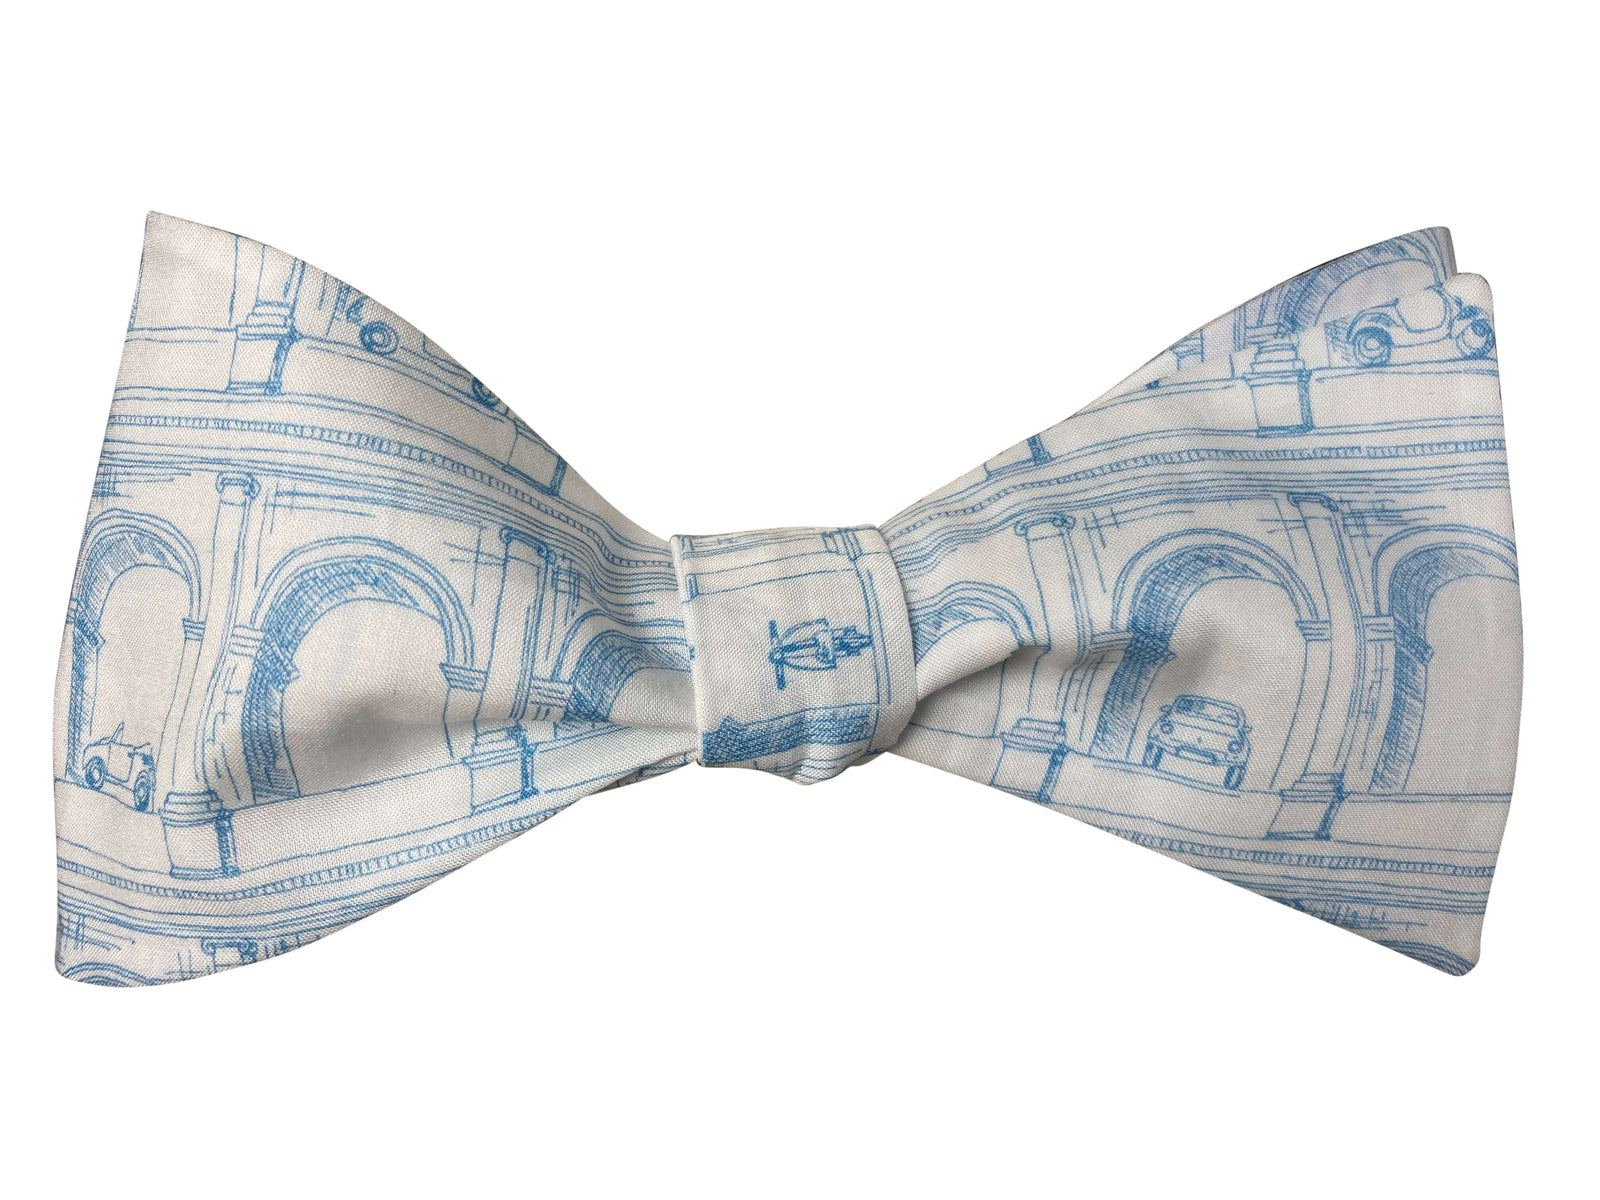 Parisian with Liberty, Blue Floral Bow Tie, Self-tie